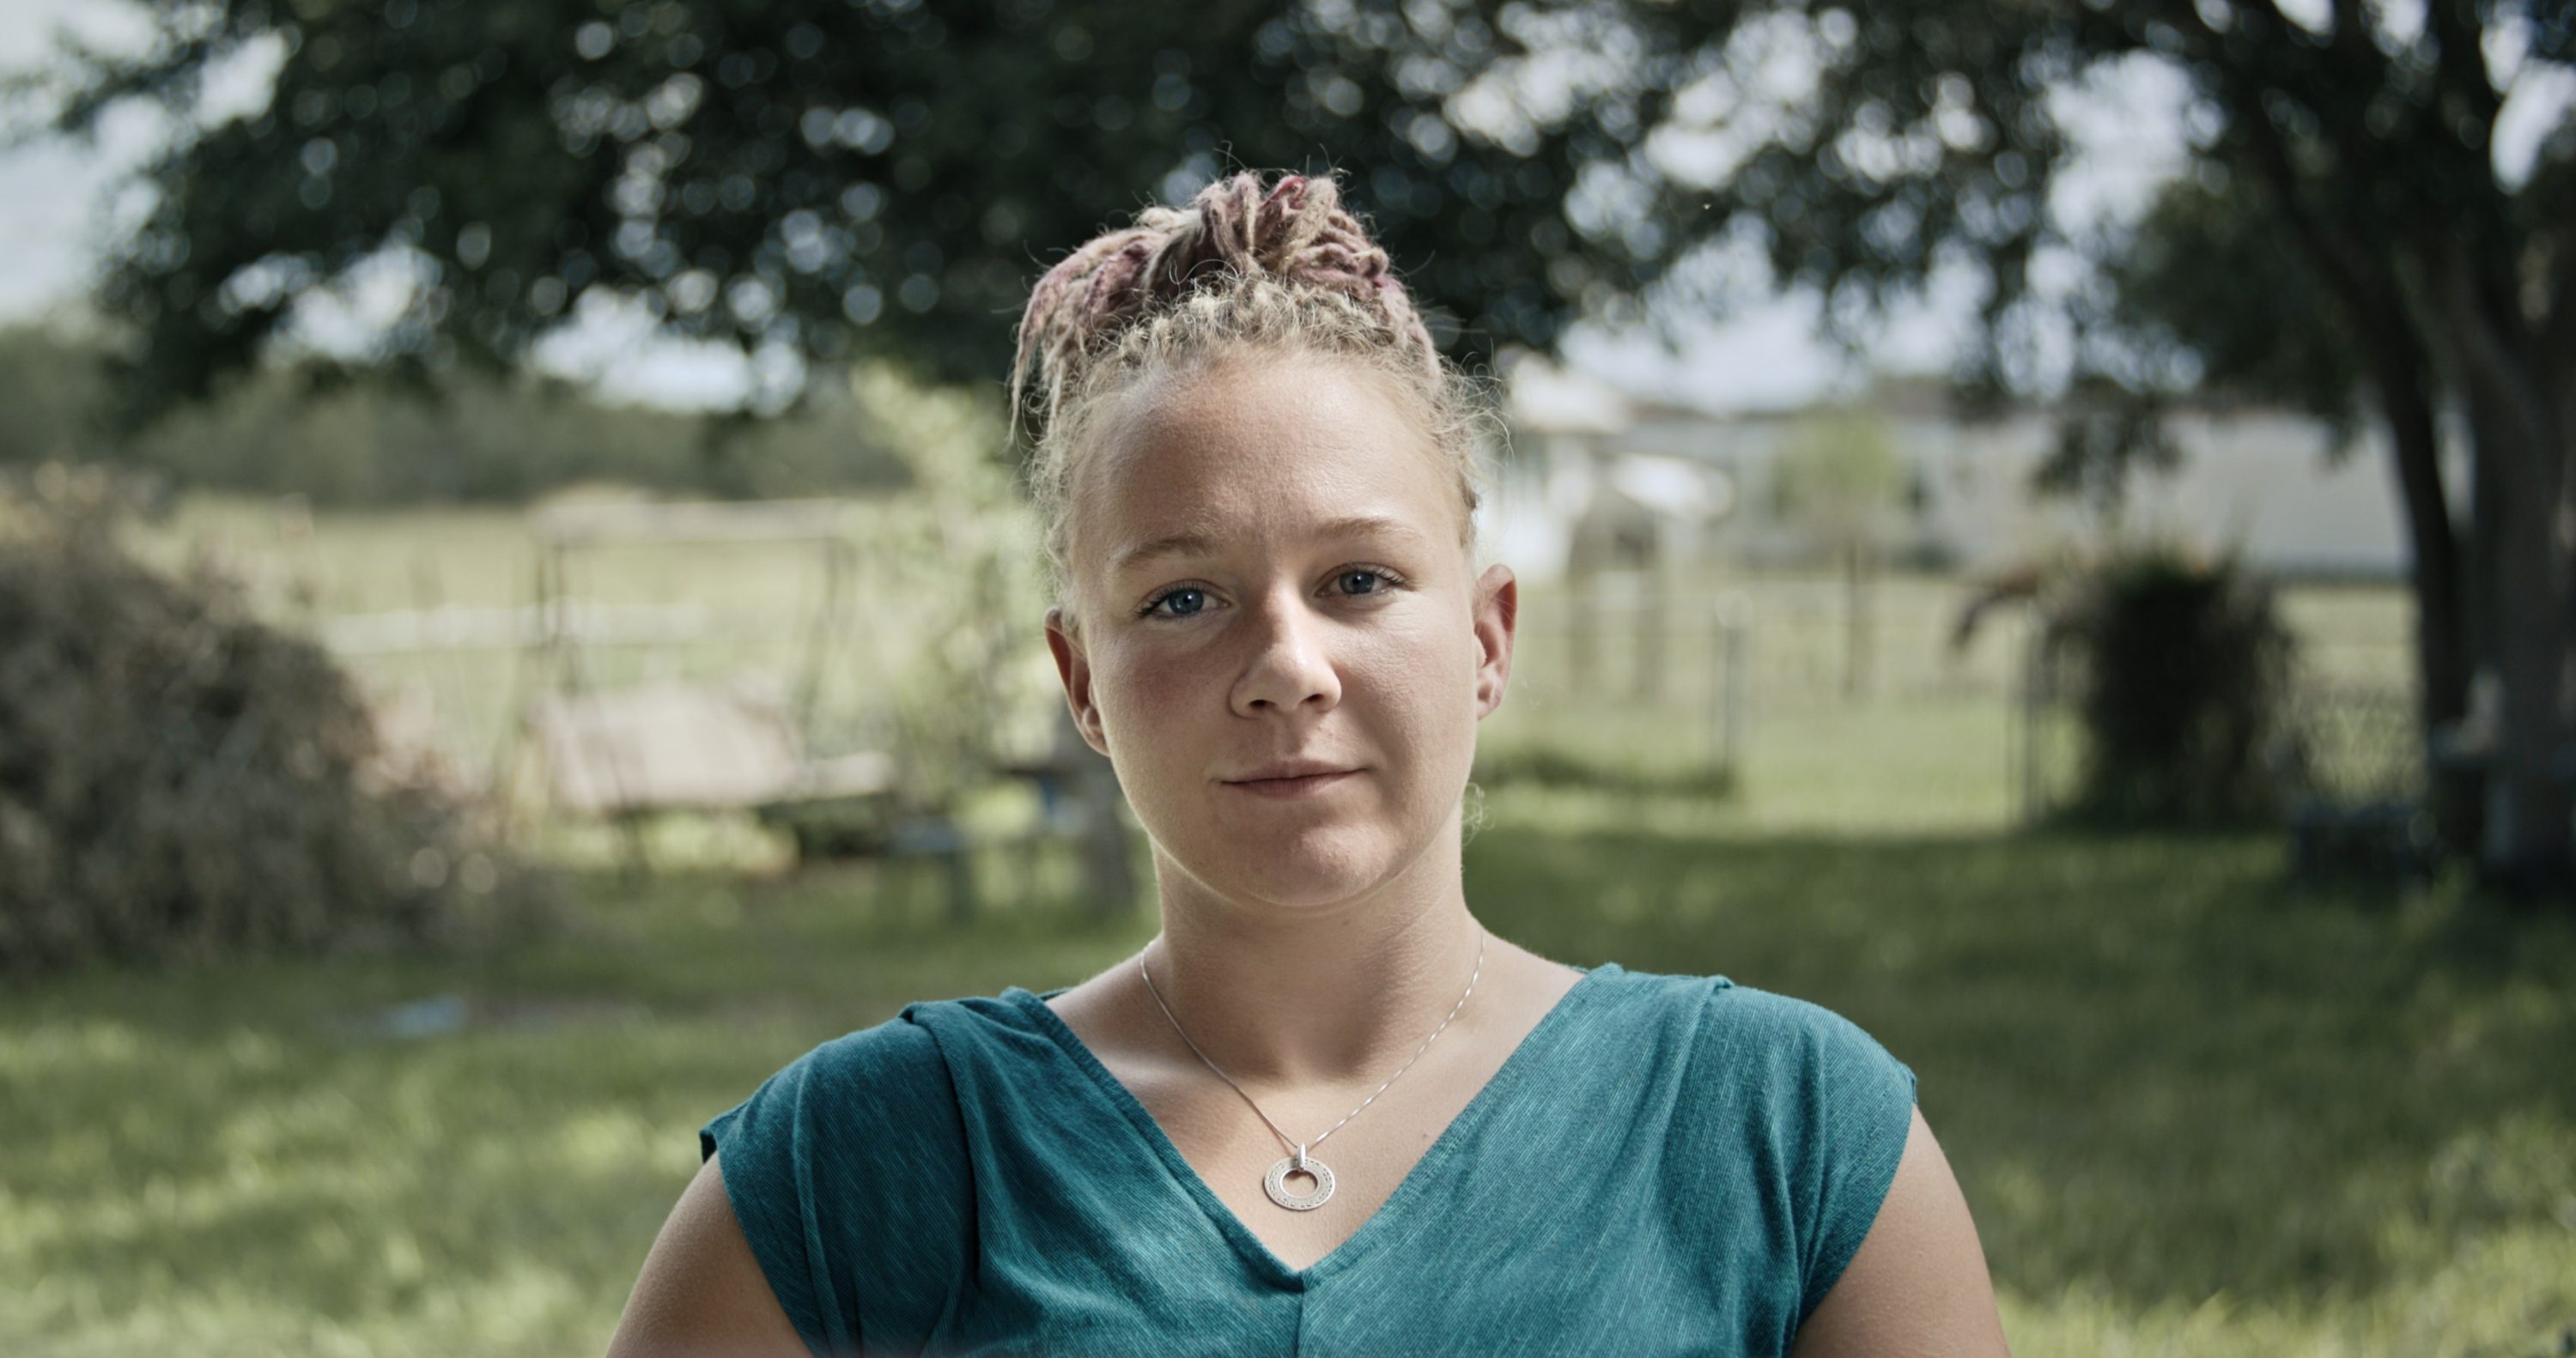 Reality Winner pictured in still shot from documentary "Reality Winner"